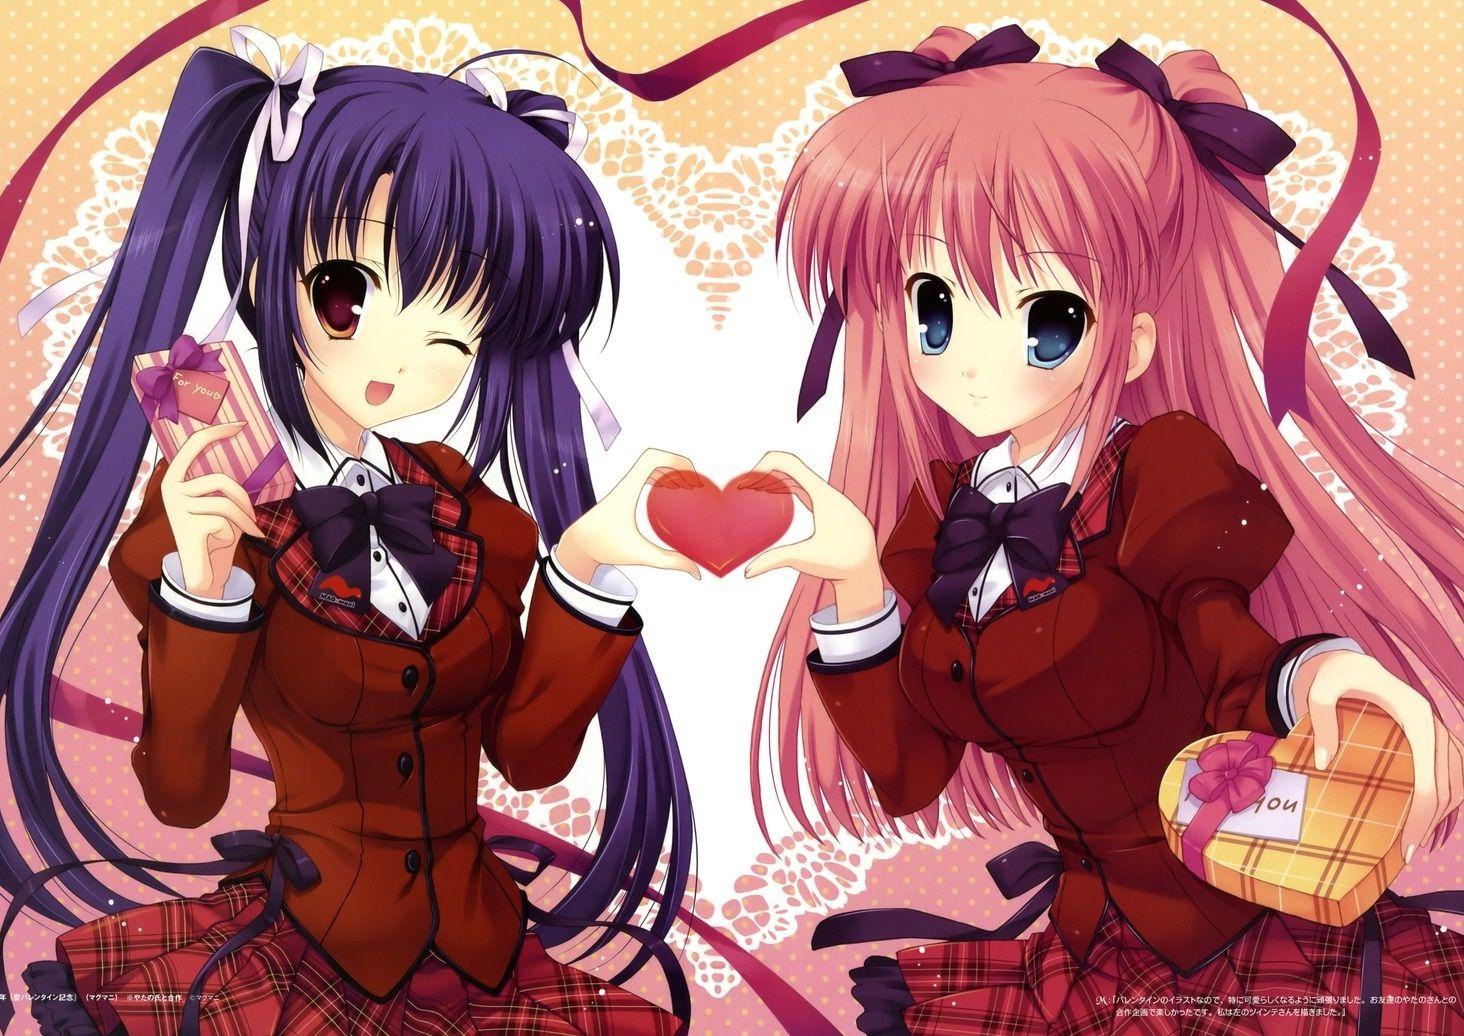 In this anime wallpapers two cute anime girls are making a valentines